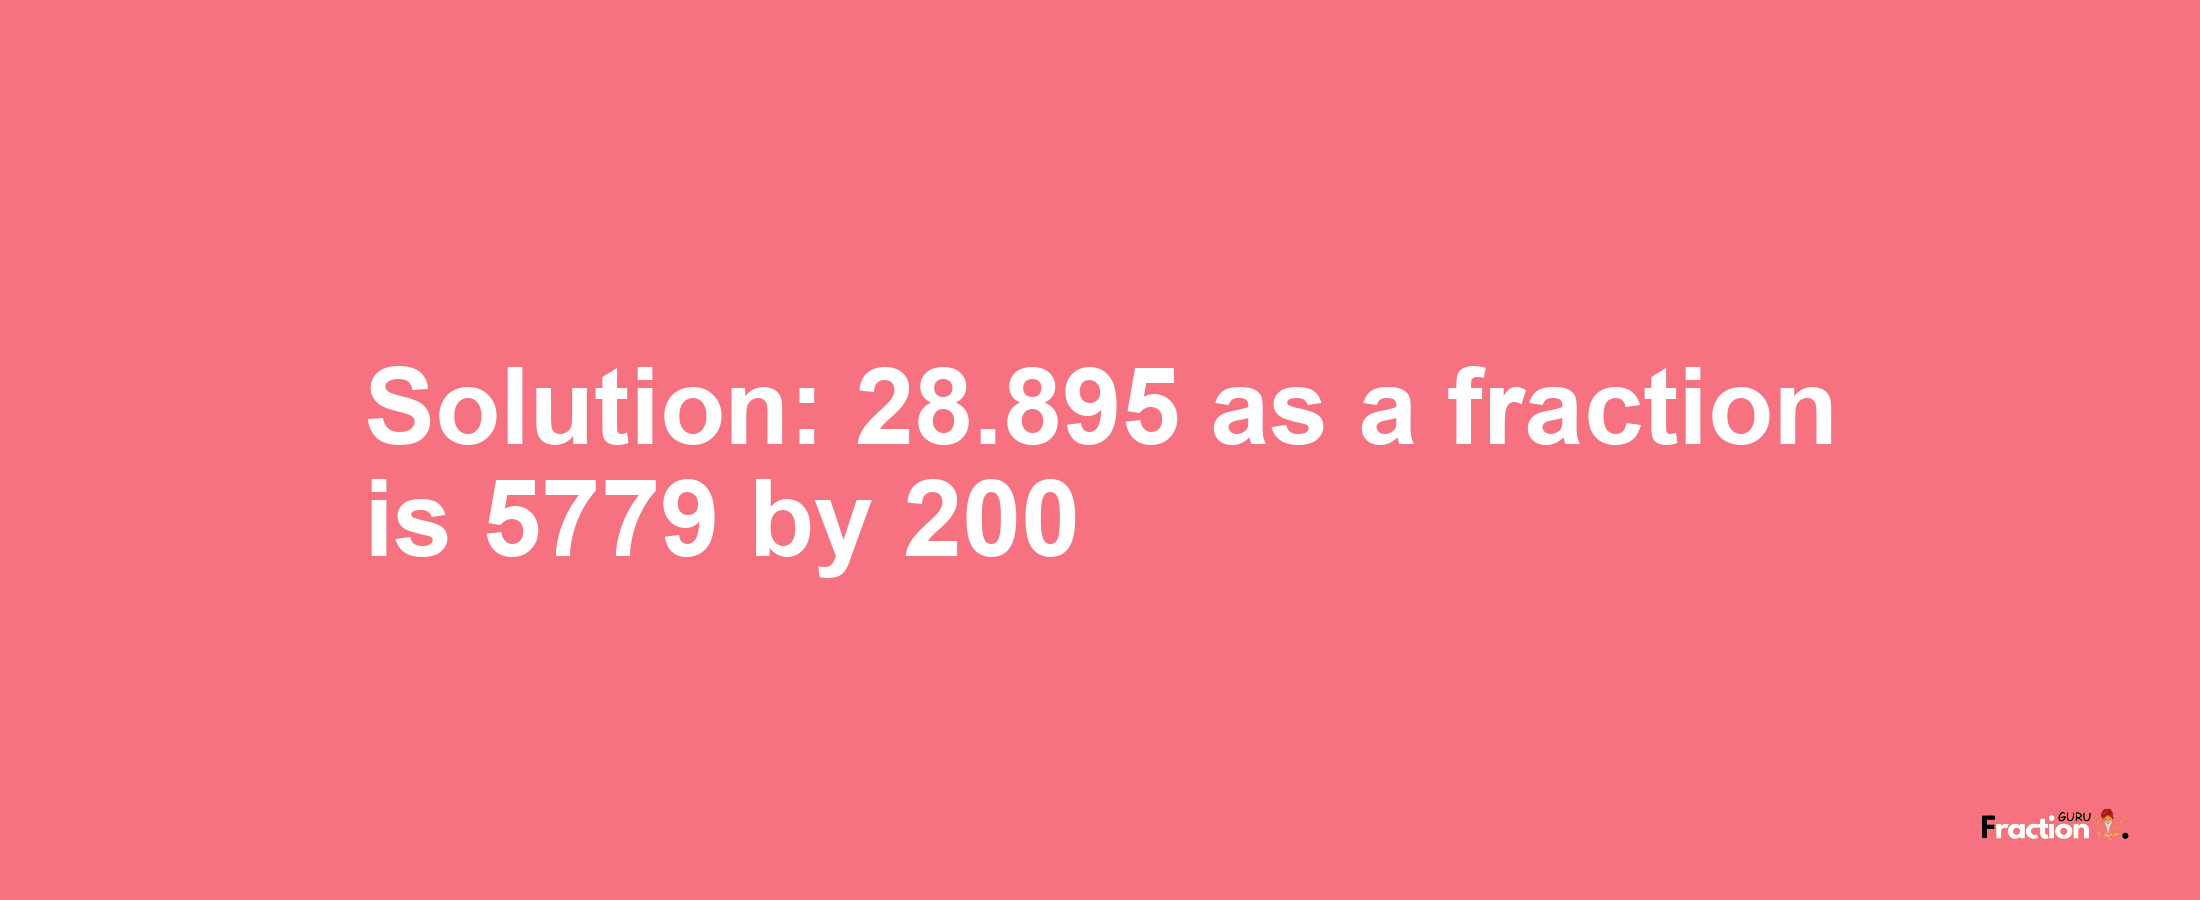 Solution:28.895 as a fraction is 5779/200